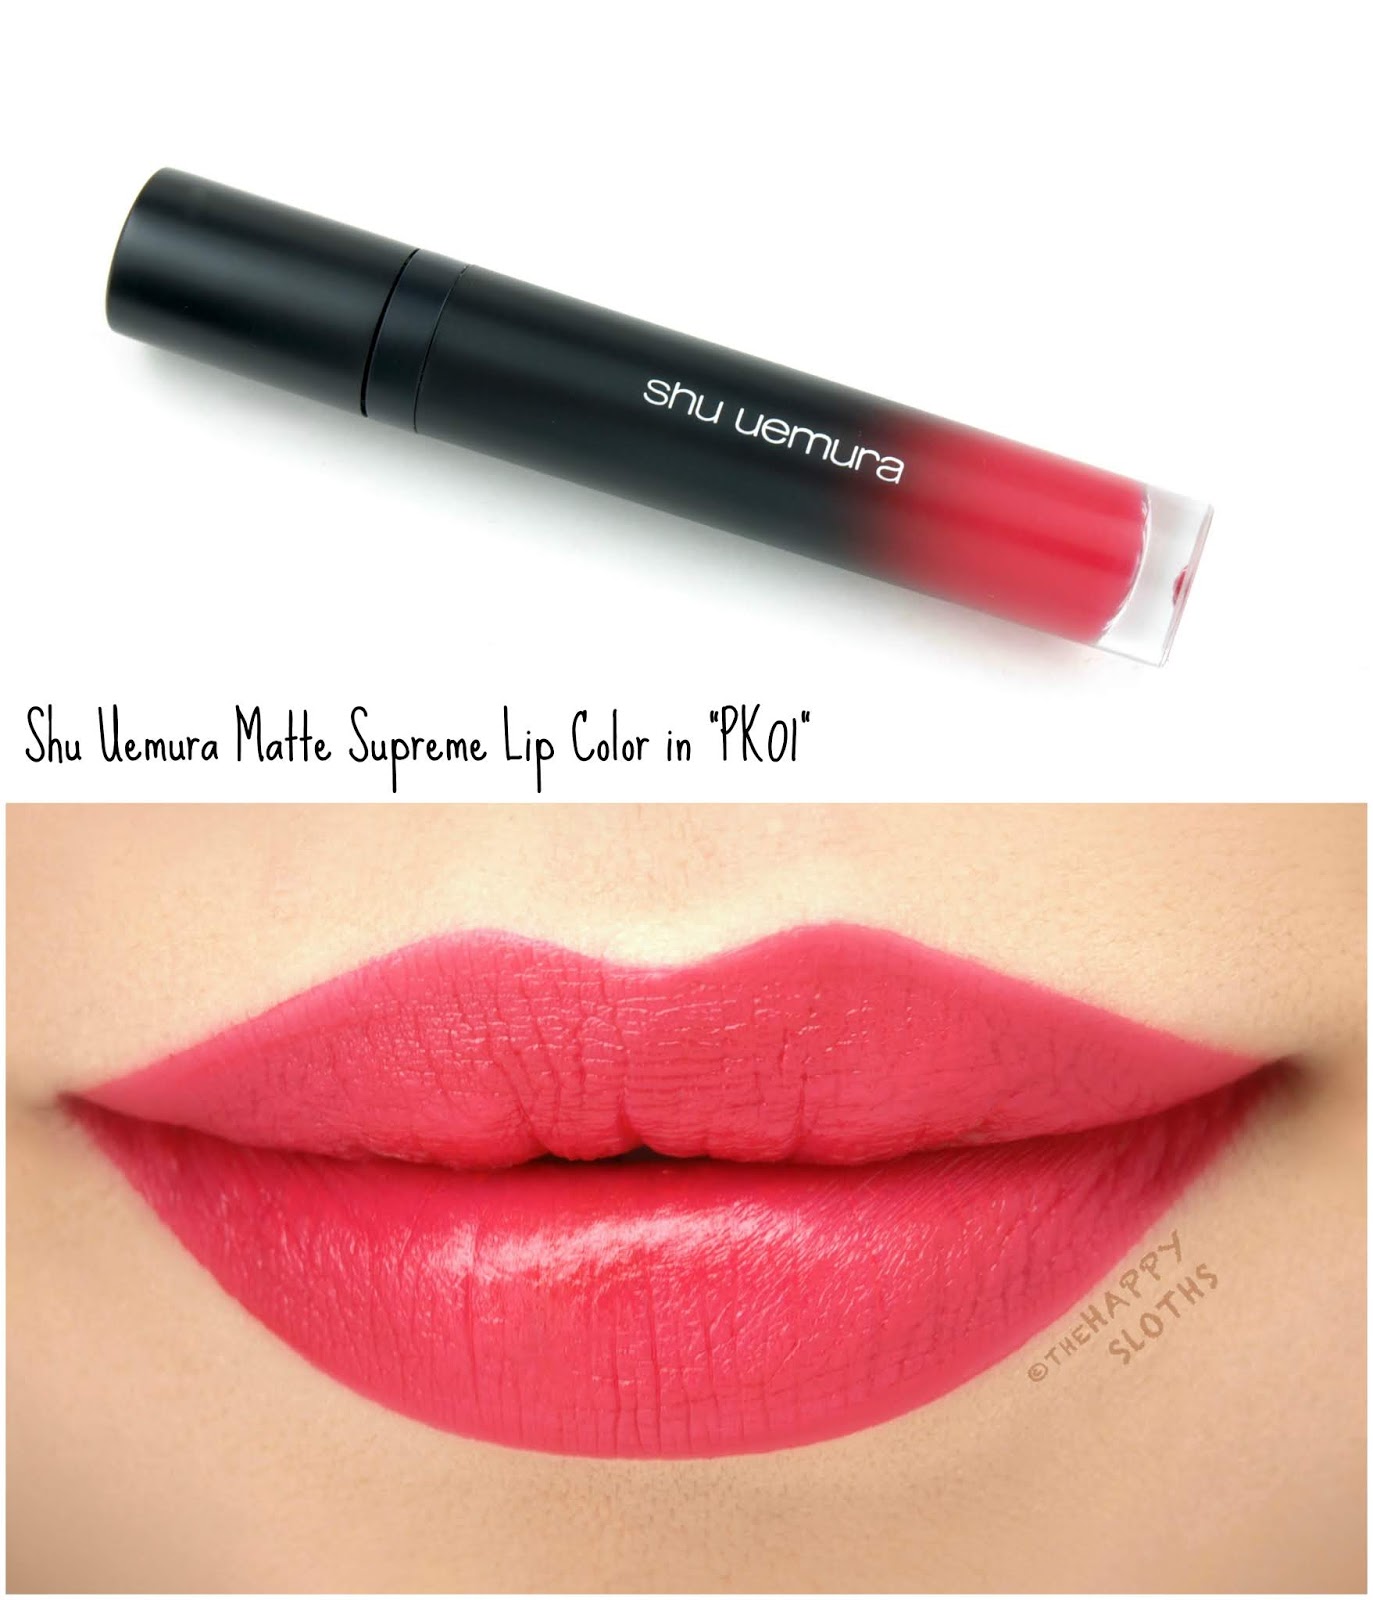 Shu Uemura | Matte Supreme Lip Color in "PK 01": Review and Swatches